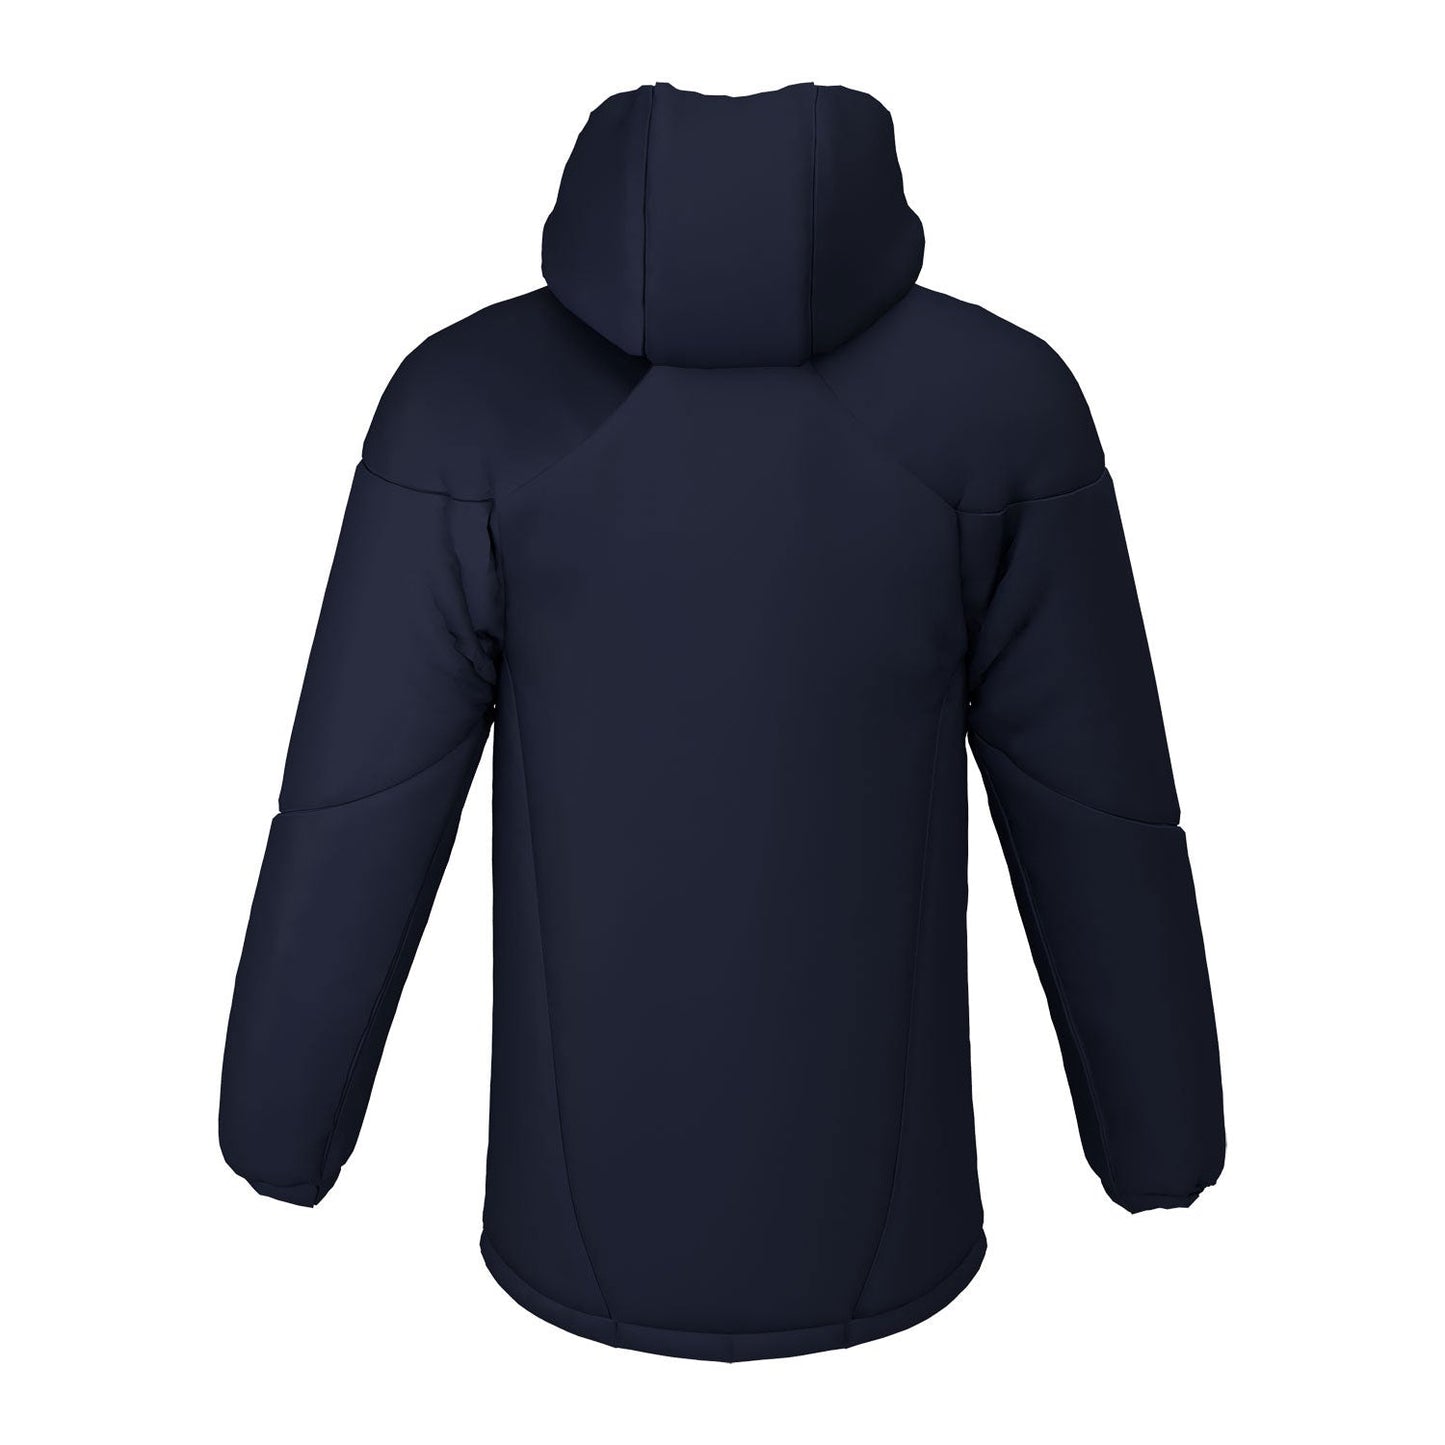 University College London Boat Club Contoured Thermal Jacket